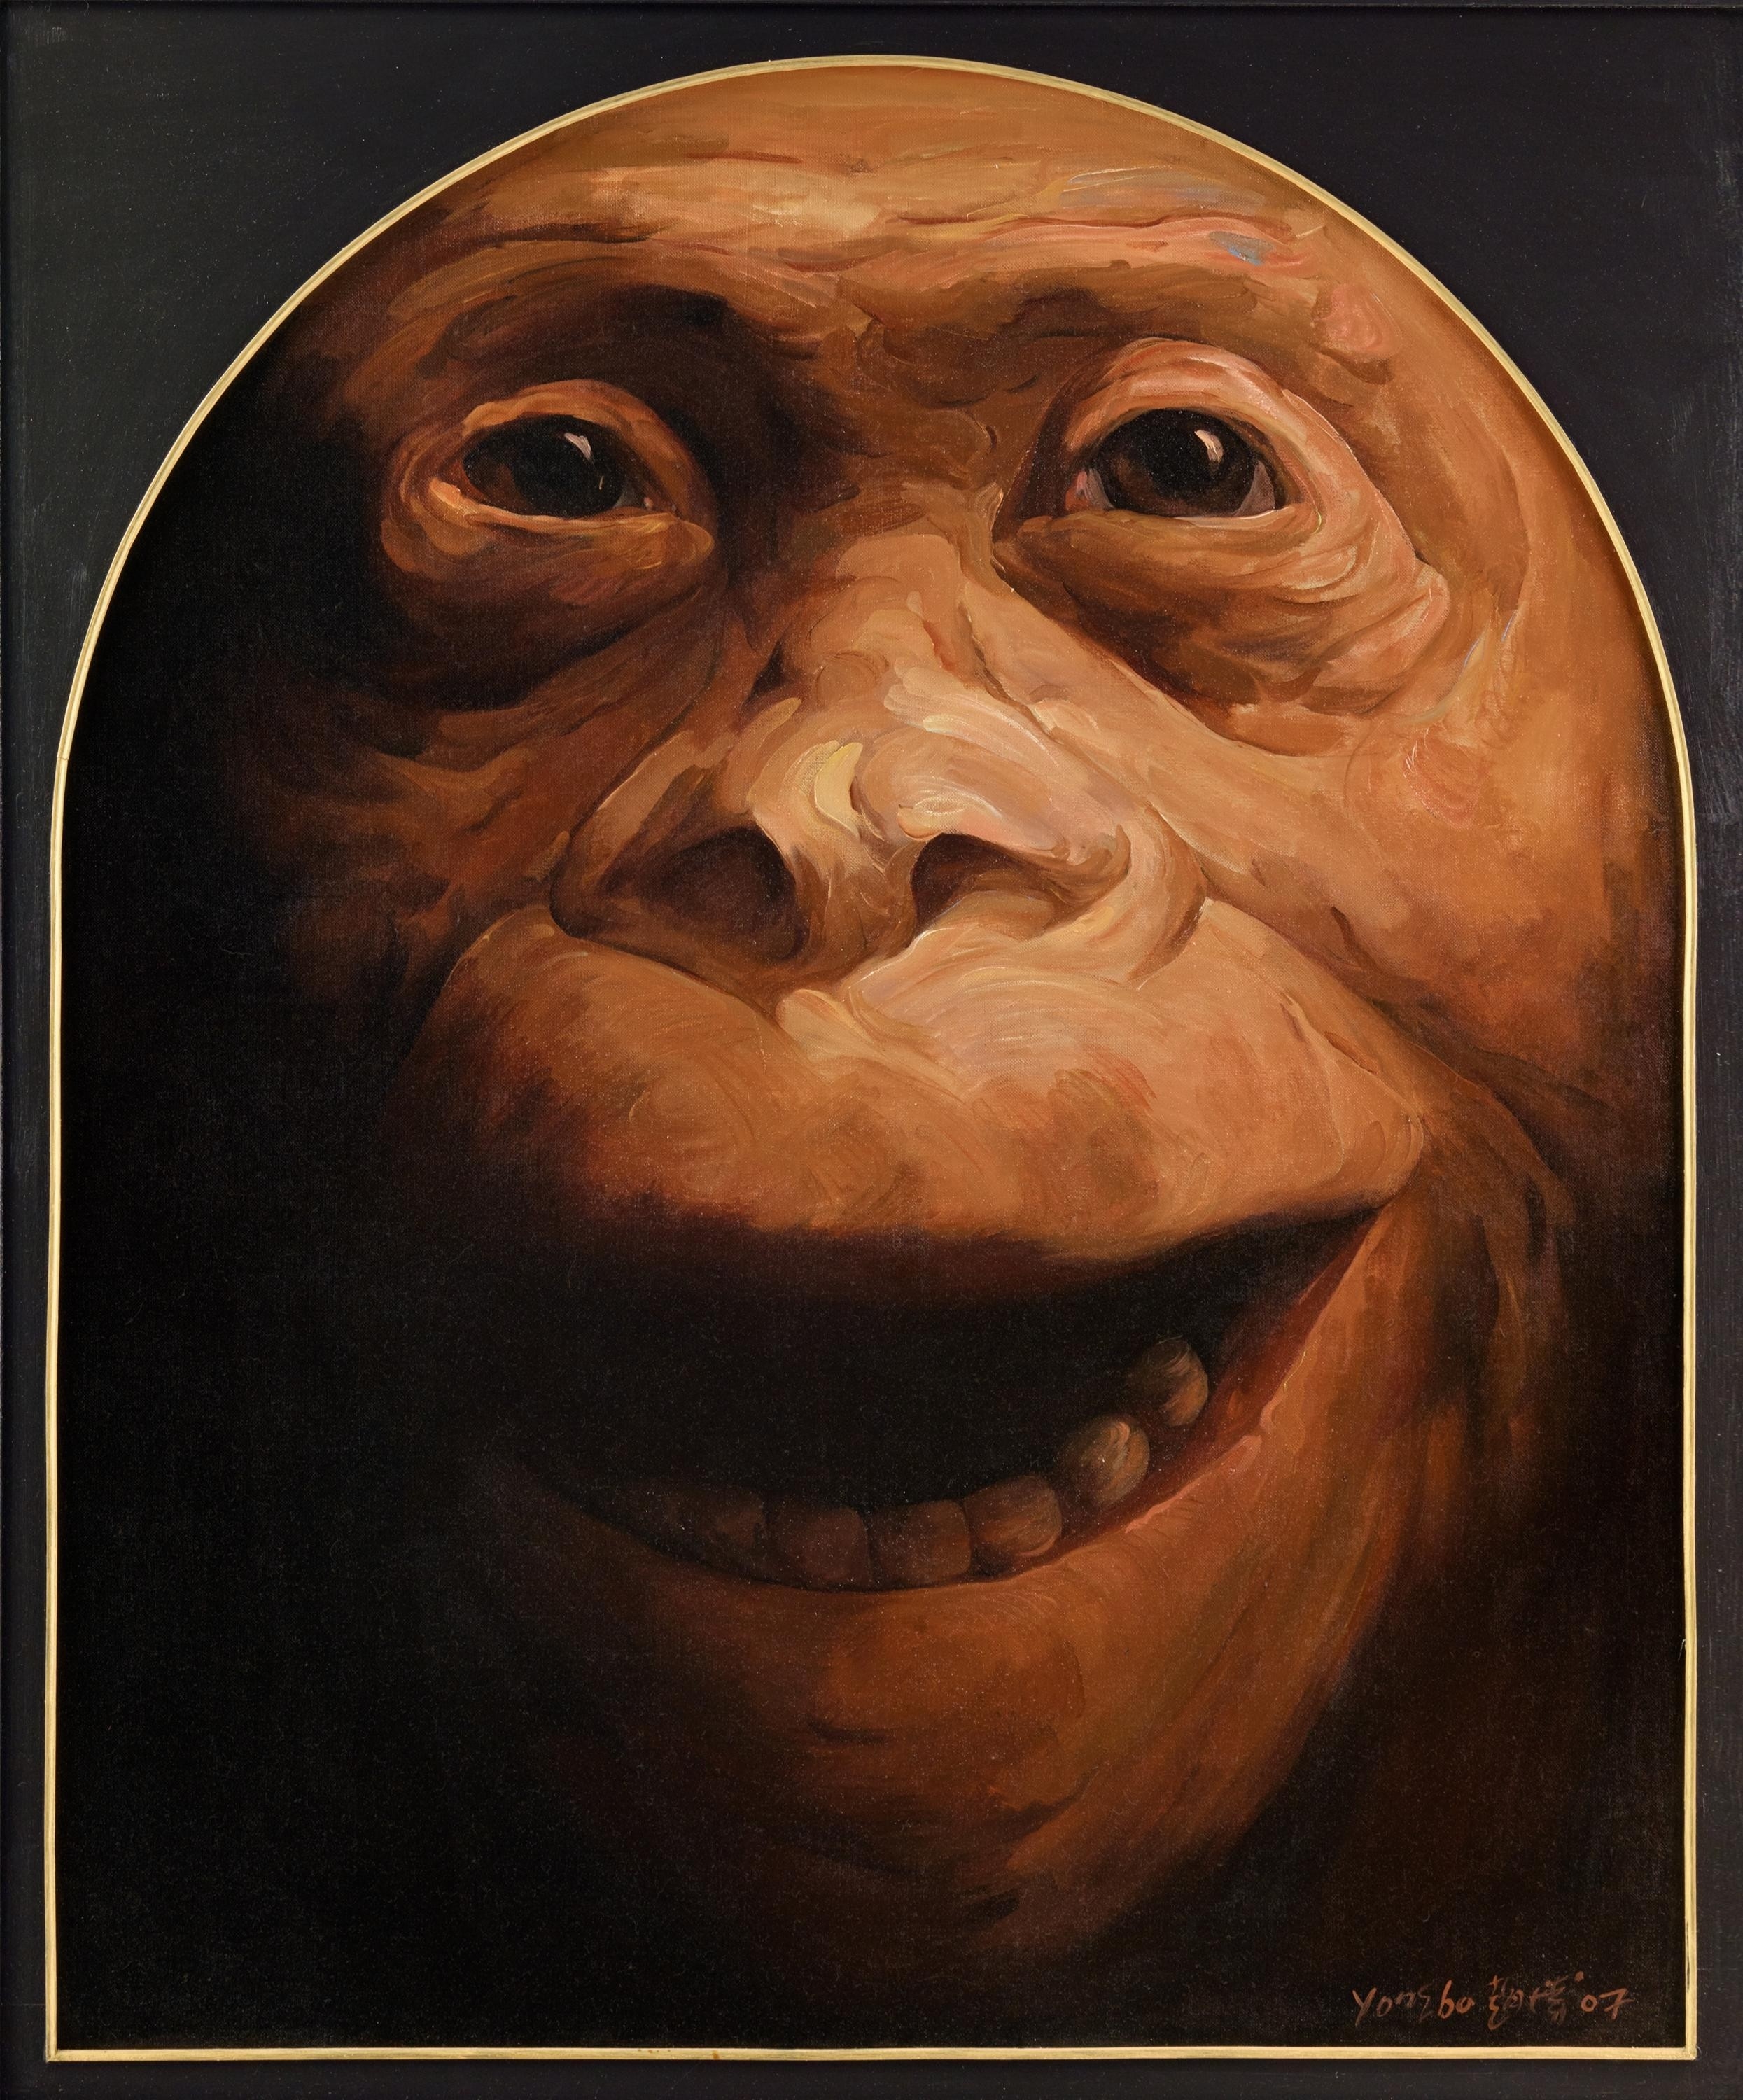 Artwork by Zhao Yongbo, Monkey, Made of Oil on canvas